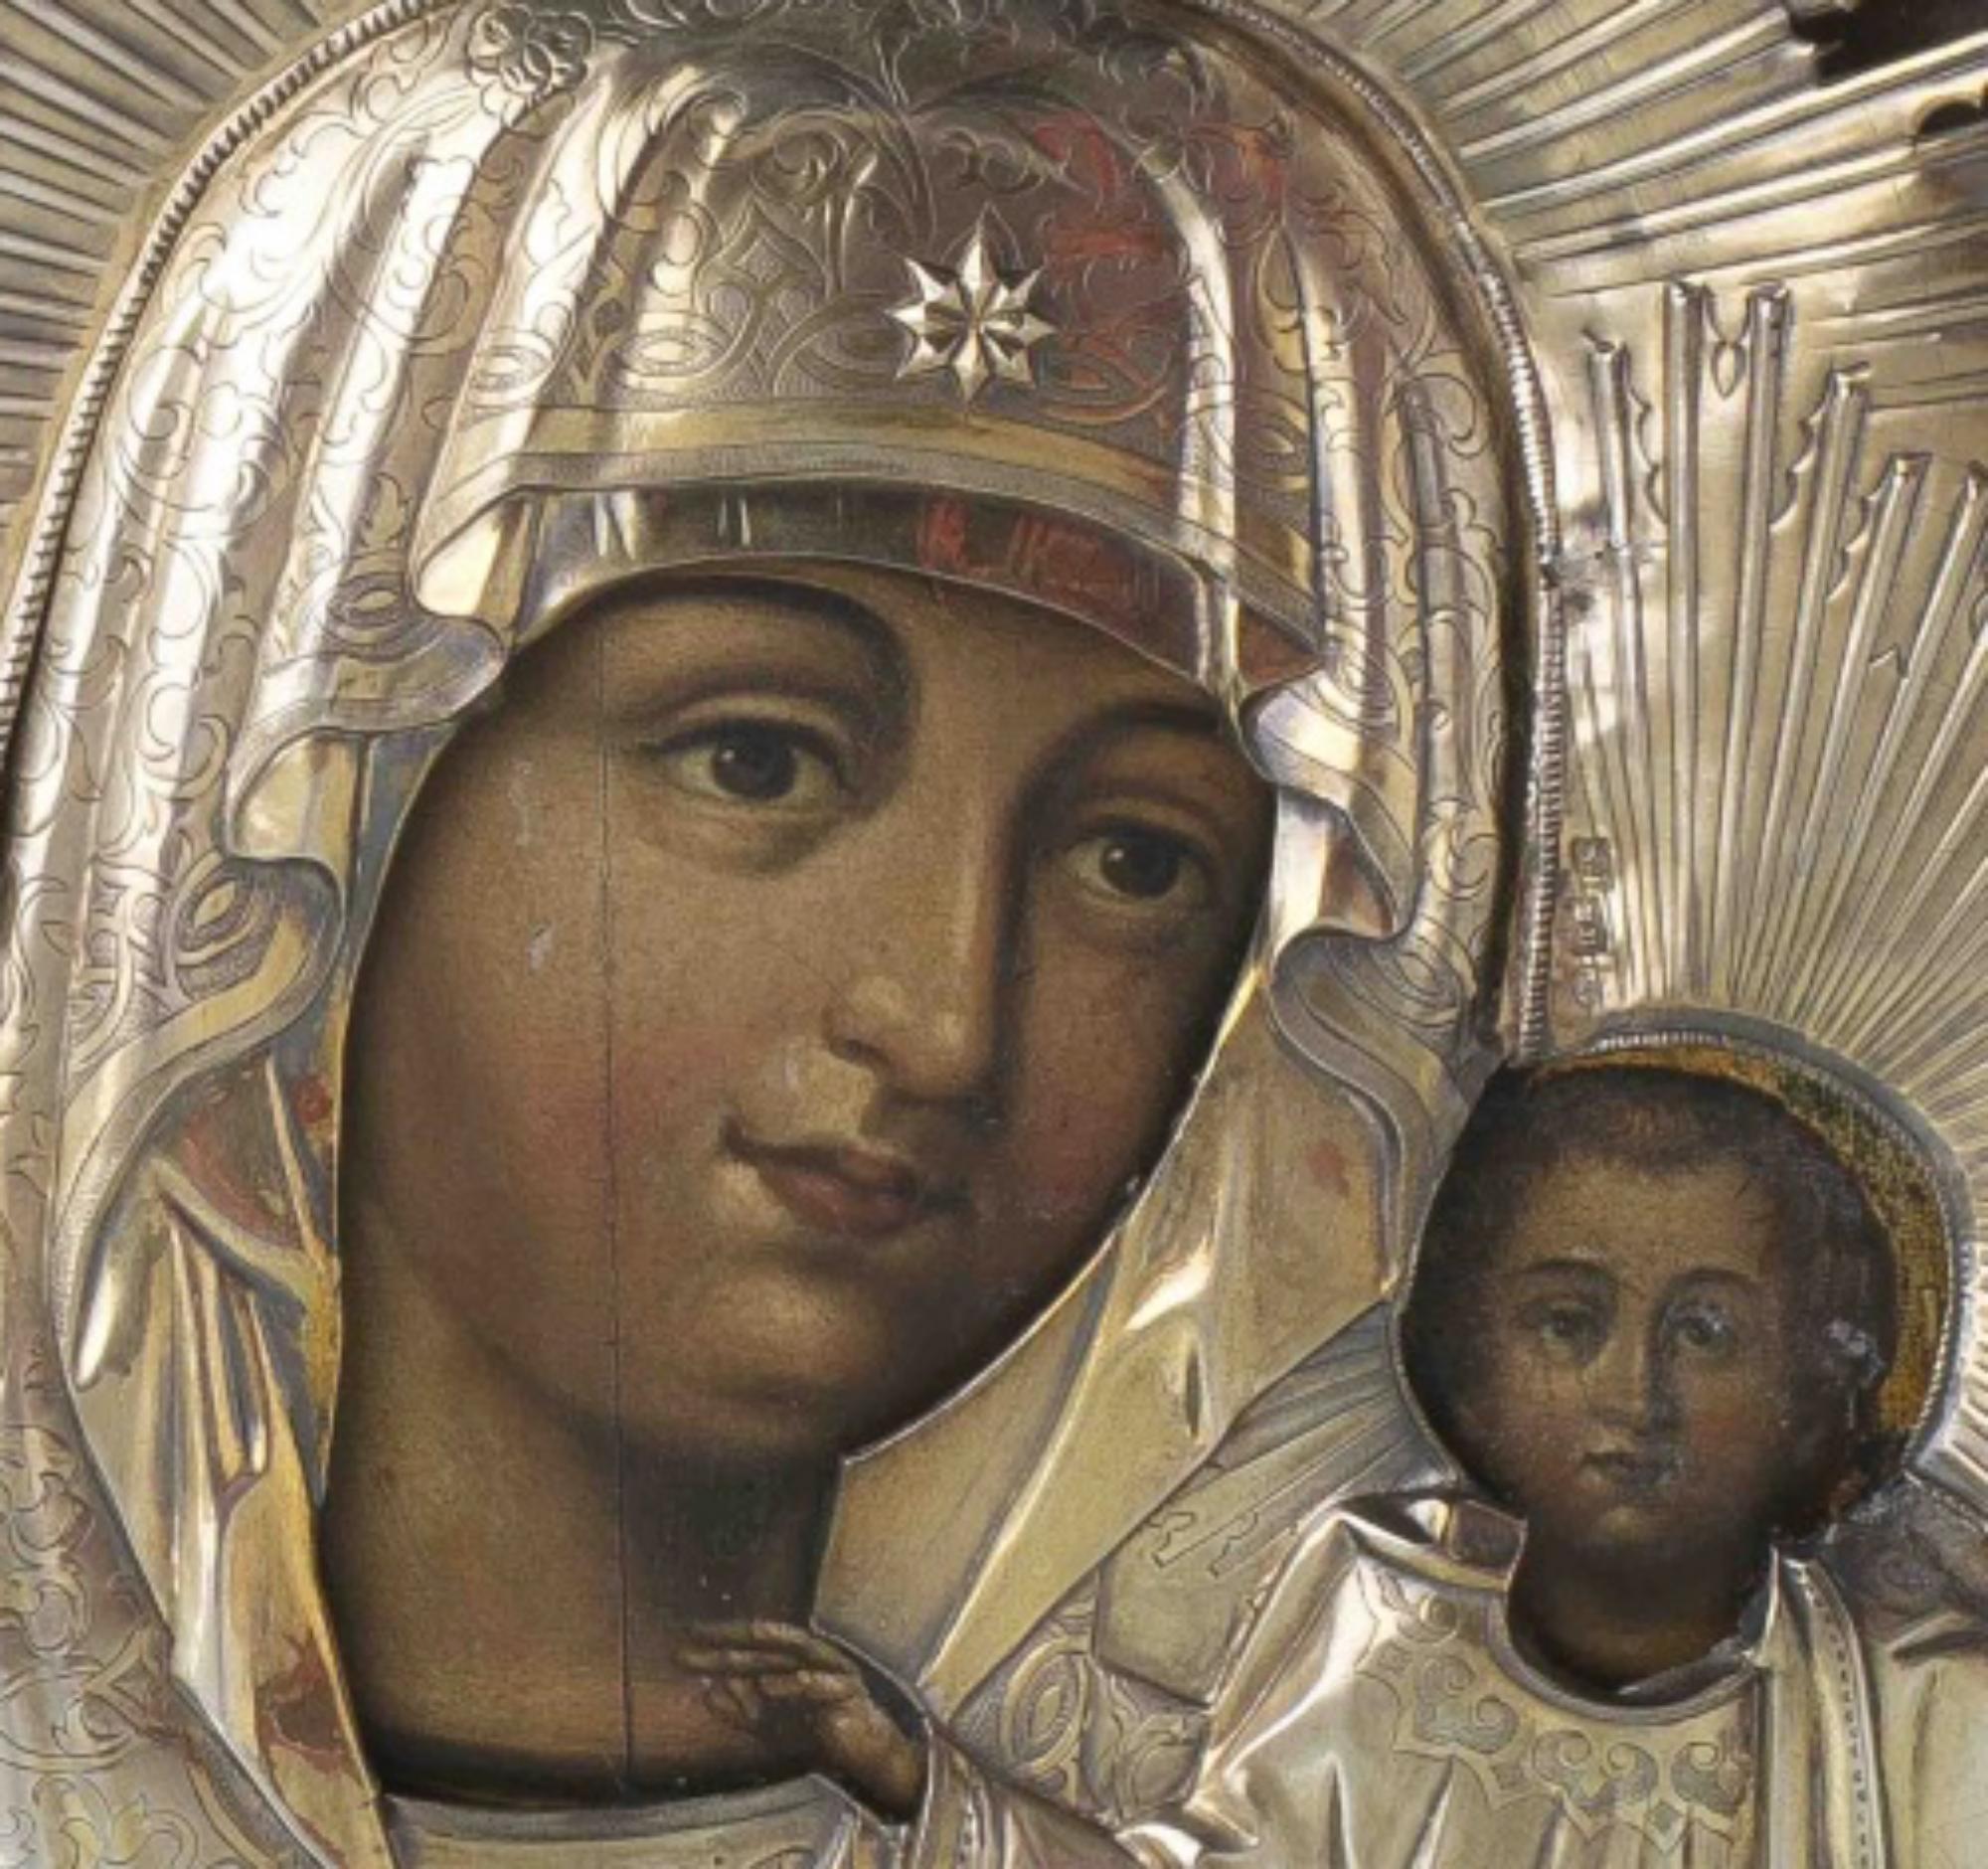 Russian icon
Our Lady of Kazan 